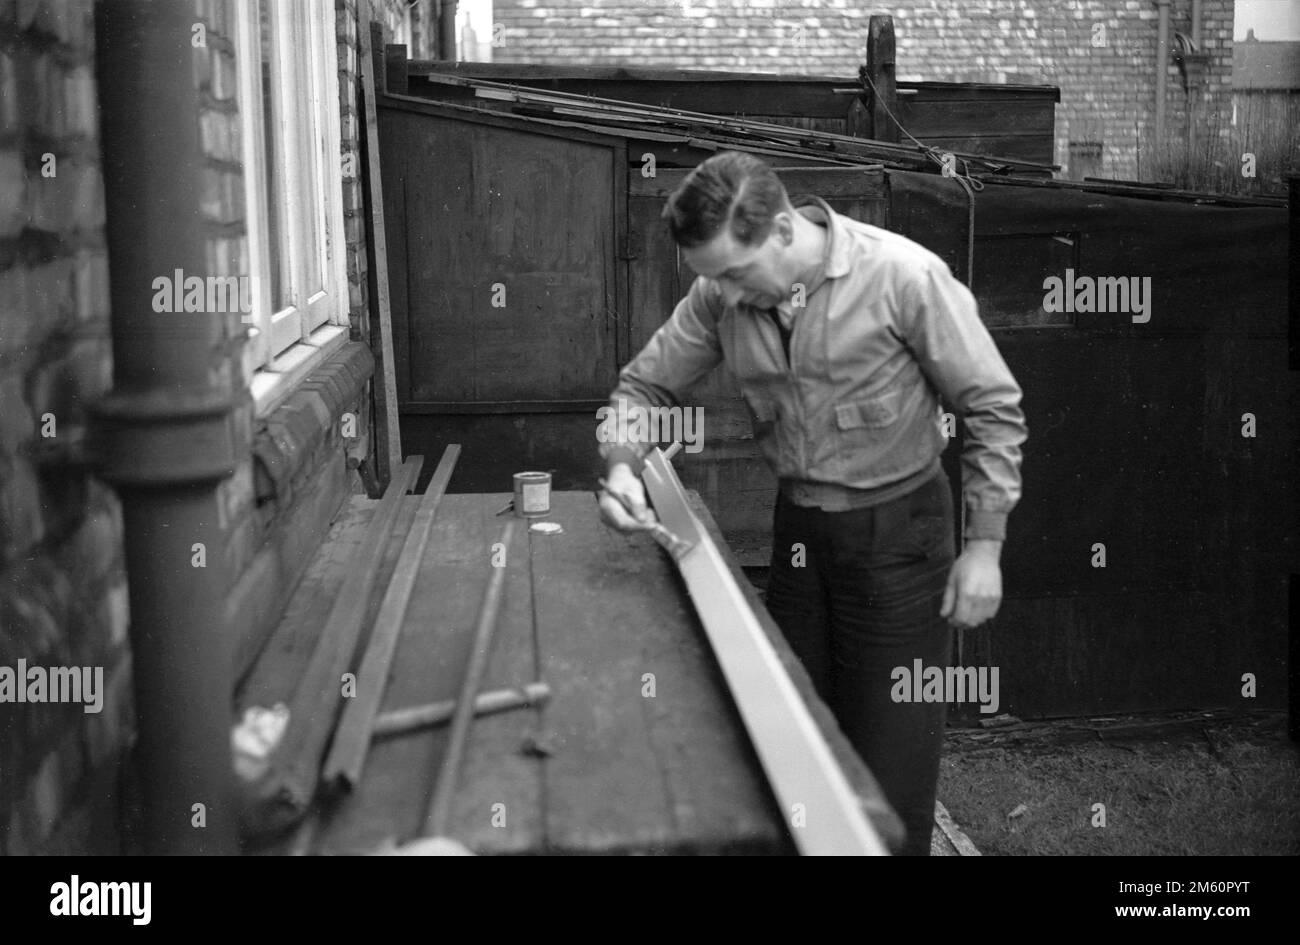 1950s, historical, on a bench in the backyard of a house, a man painting a piece of wood. Stock Photo